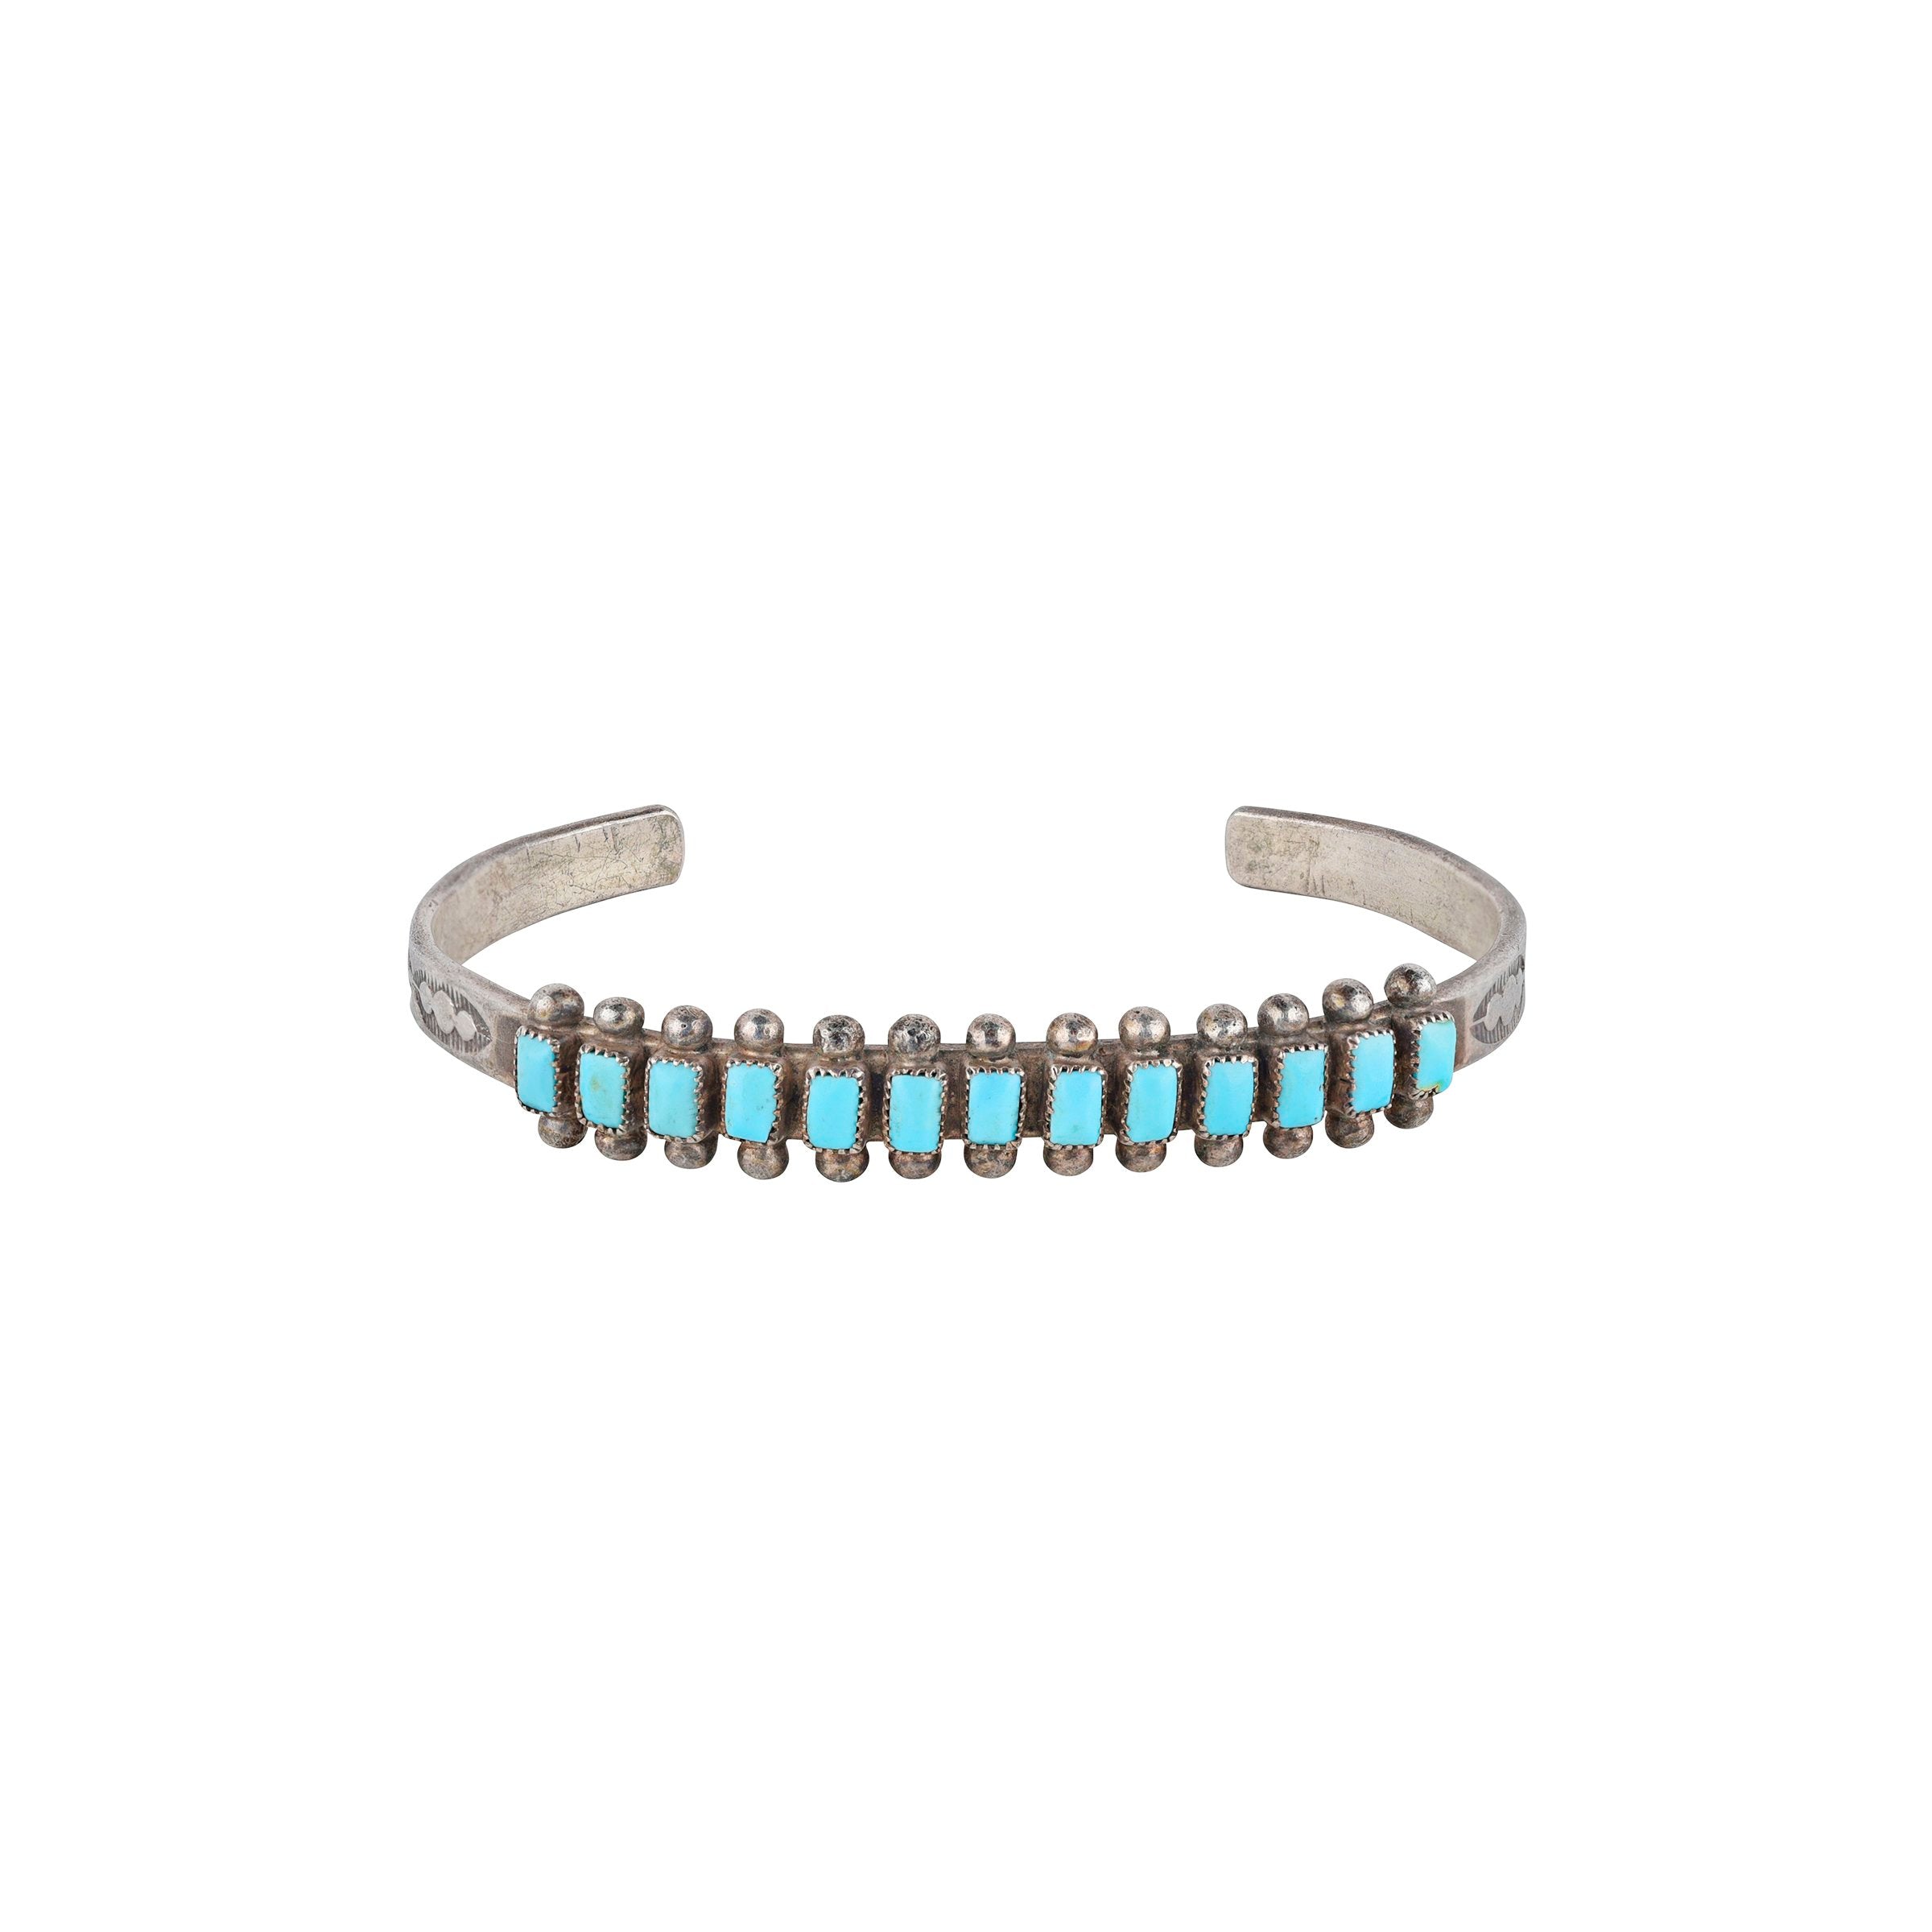 Vintage Turquoise Row Cuff